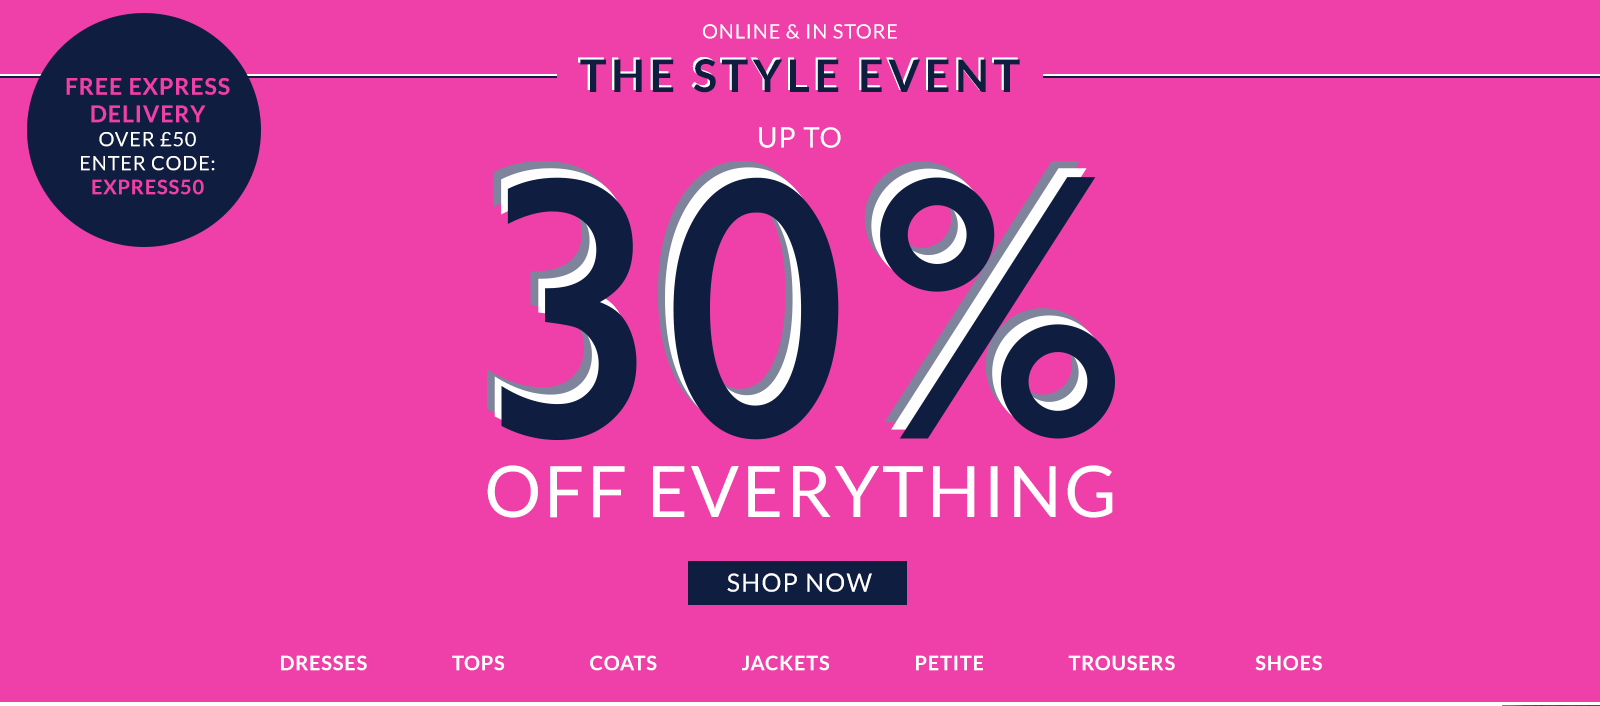 Wallis: up to 30% off everything